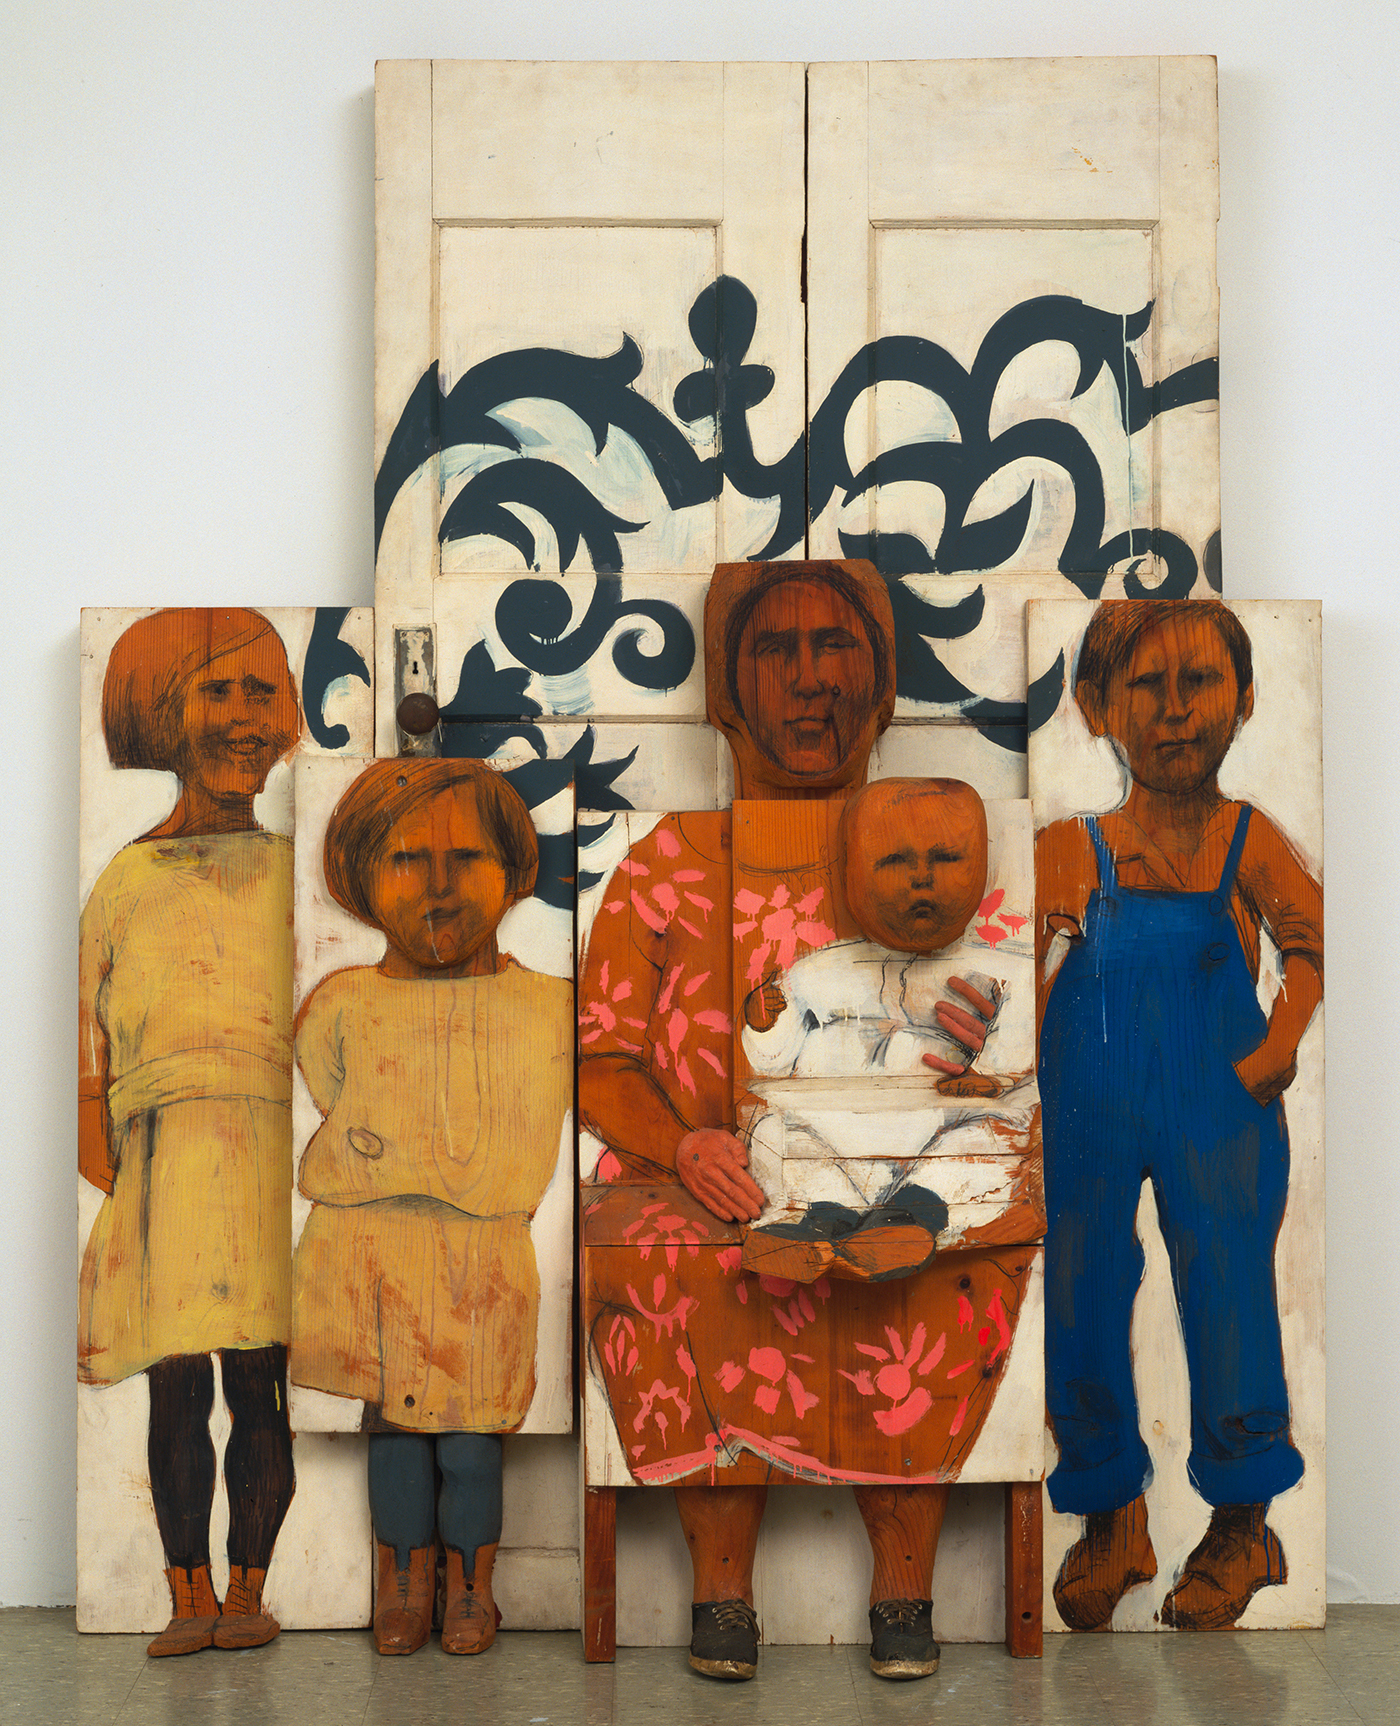 Marisol, "The Family" (1962), painted wood, sneakers, door knob and plate, three sections, overall dimensions 6' 10 5/8" x 65 1/2" x 15 1/2" (209.8 x 166.3 x 39.3 cm), The Museum of Modern Art, NY (© 2016 Marisol) 